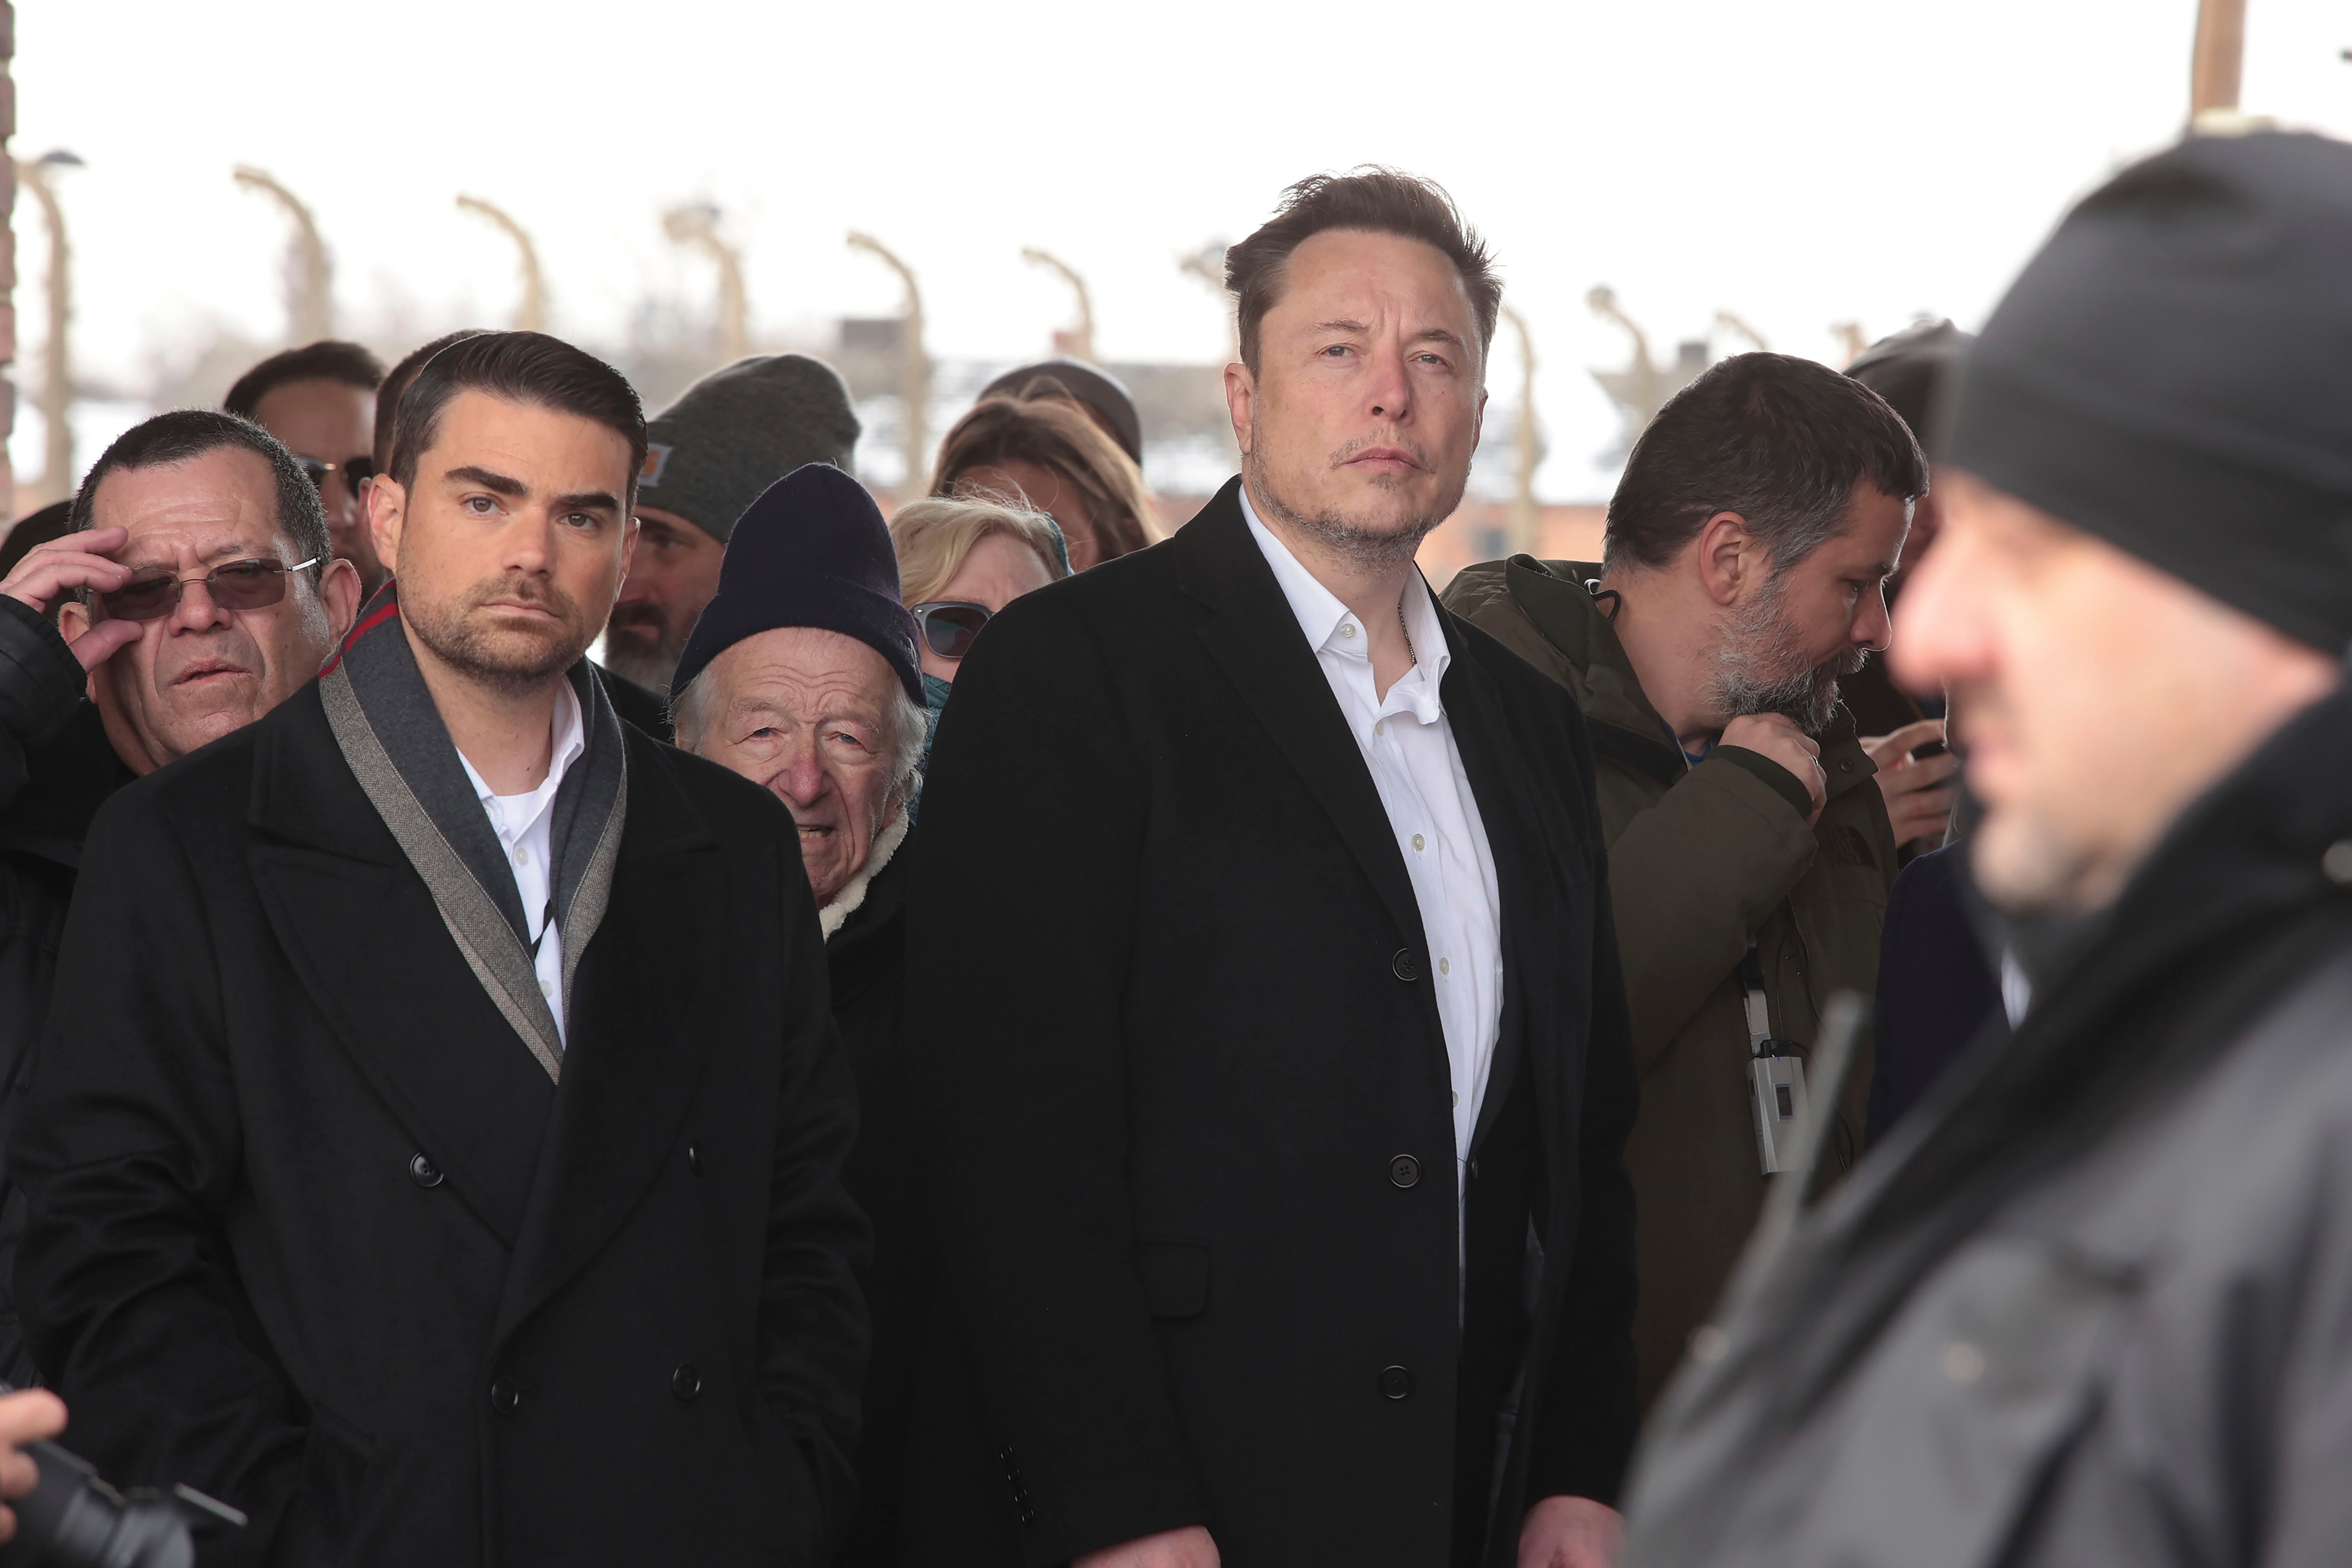 Elon Musk made a high-profile visit to Auschwitz-Birkenau, the former Nazi concentration camp in Poland